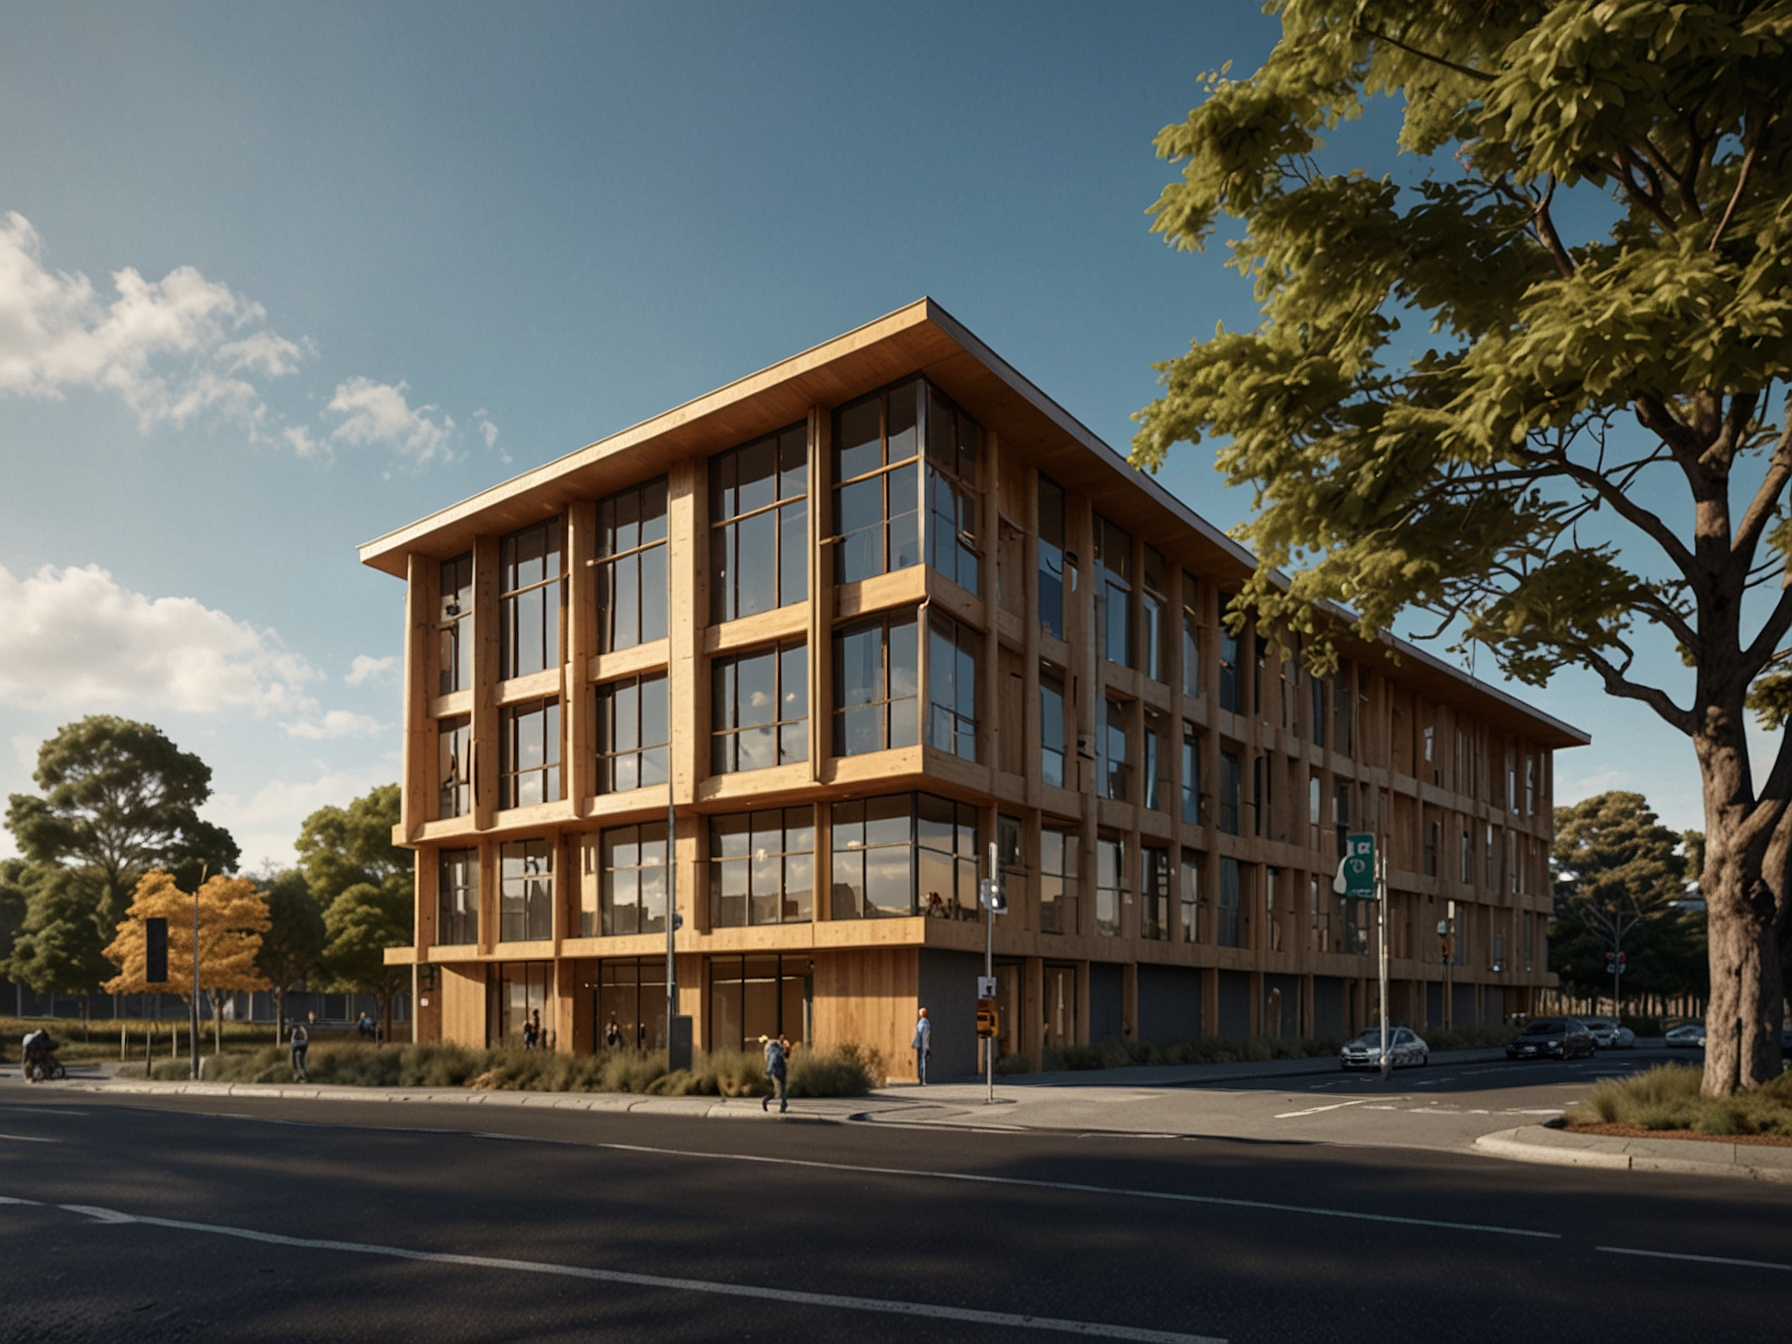 Illustration of the future state-of-the-art mass timber office building on Karangahape Road, showcasing its modern design, large windows, and sustainable features such as solar panels.